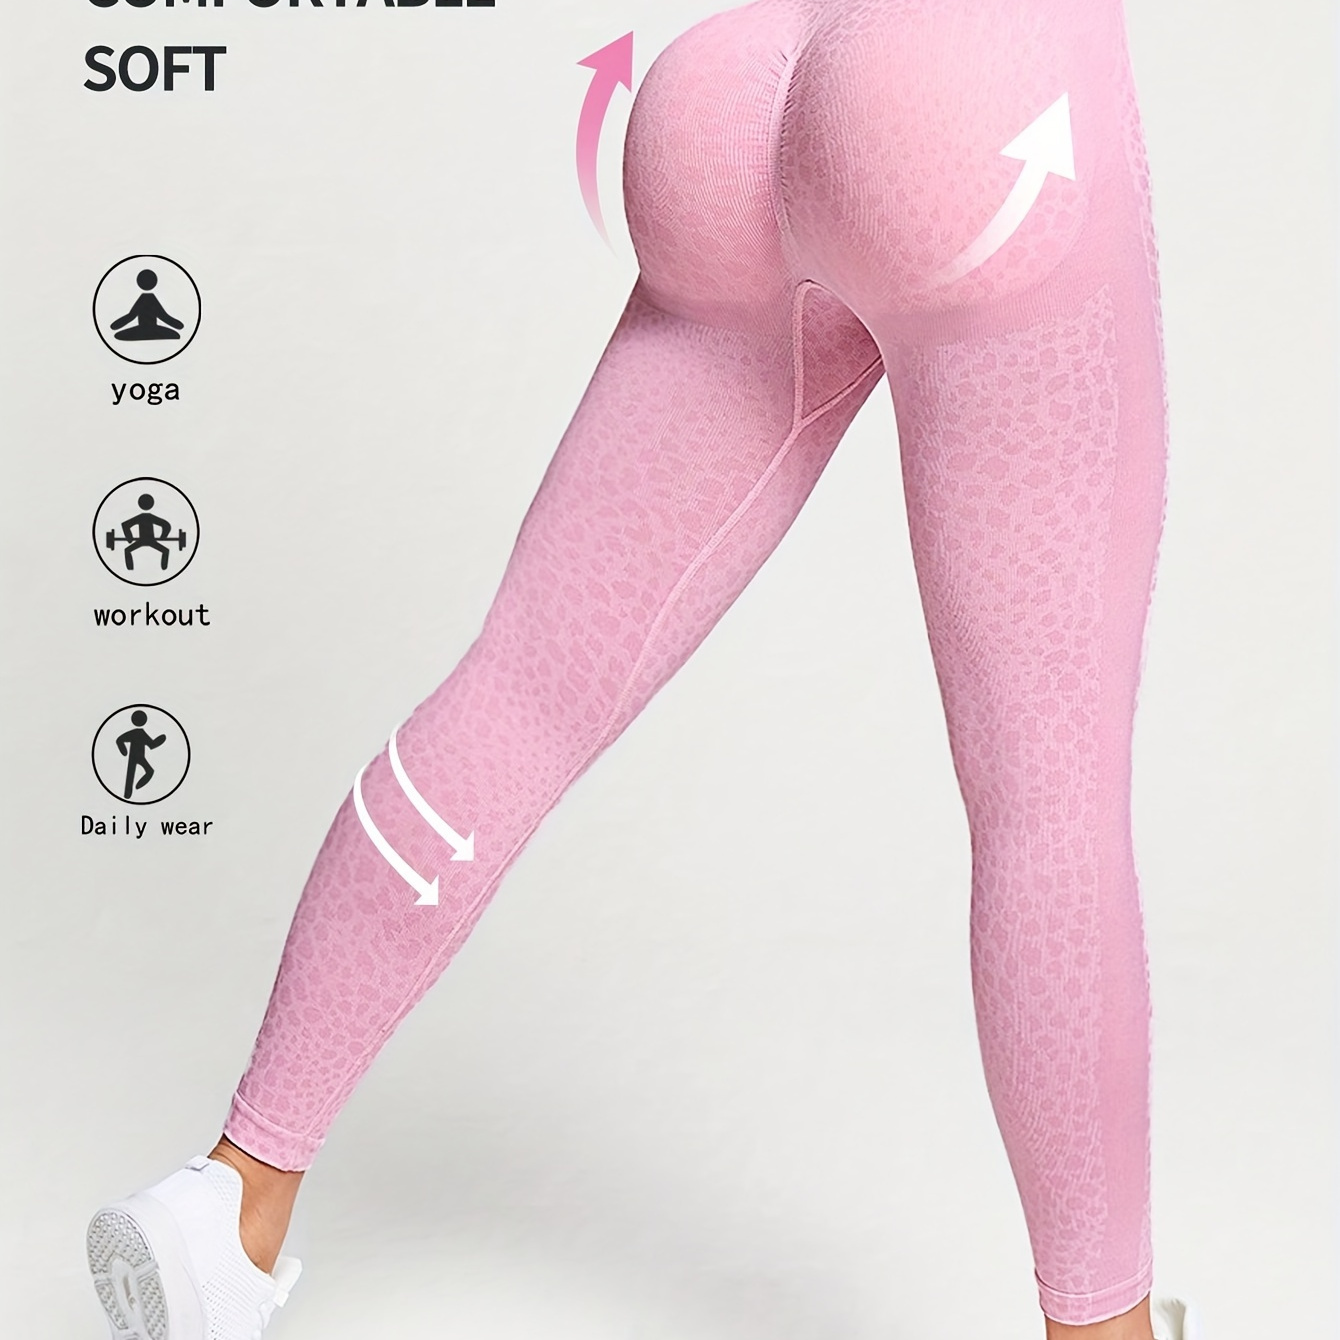 

Women's High Waist Yoga Pants, Butt Lifting Workout Leggings, Non-see Through Fabric, Tummy Control, Hip Lift Comfort Fitness Wear For Running And Daily Use